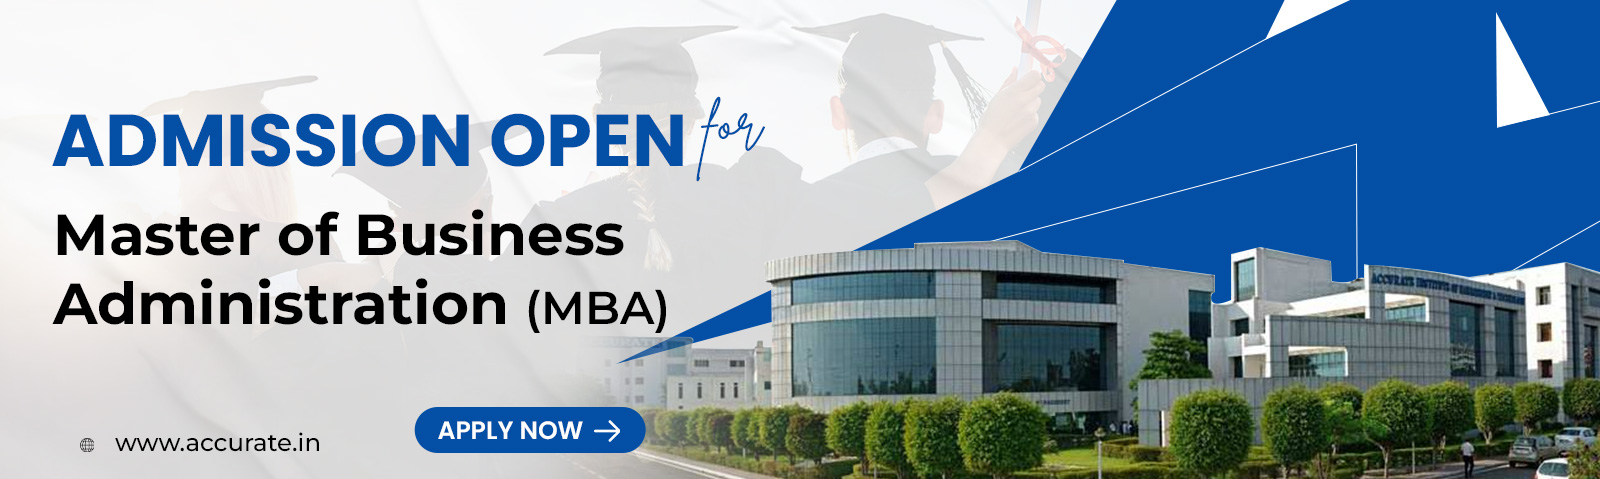 admission open for mba